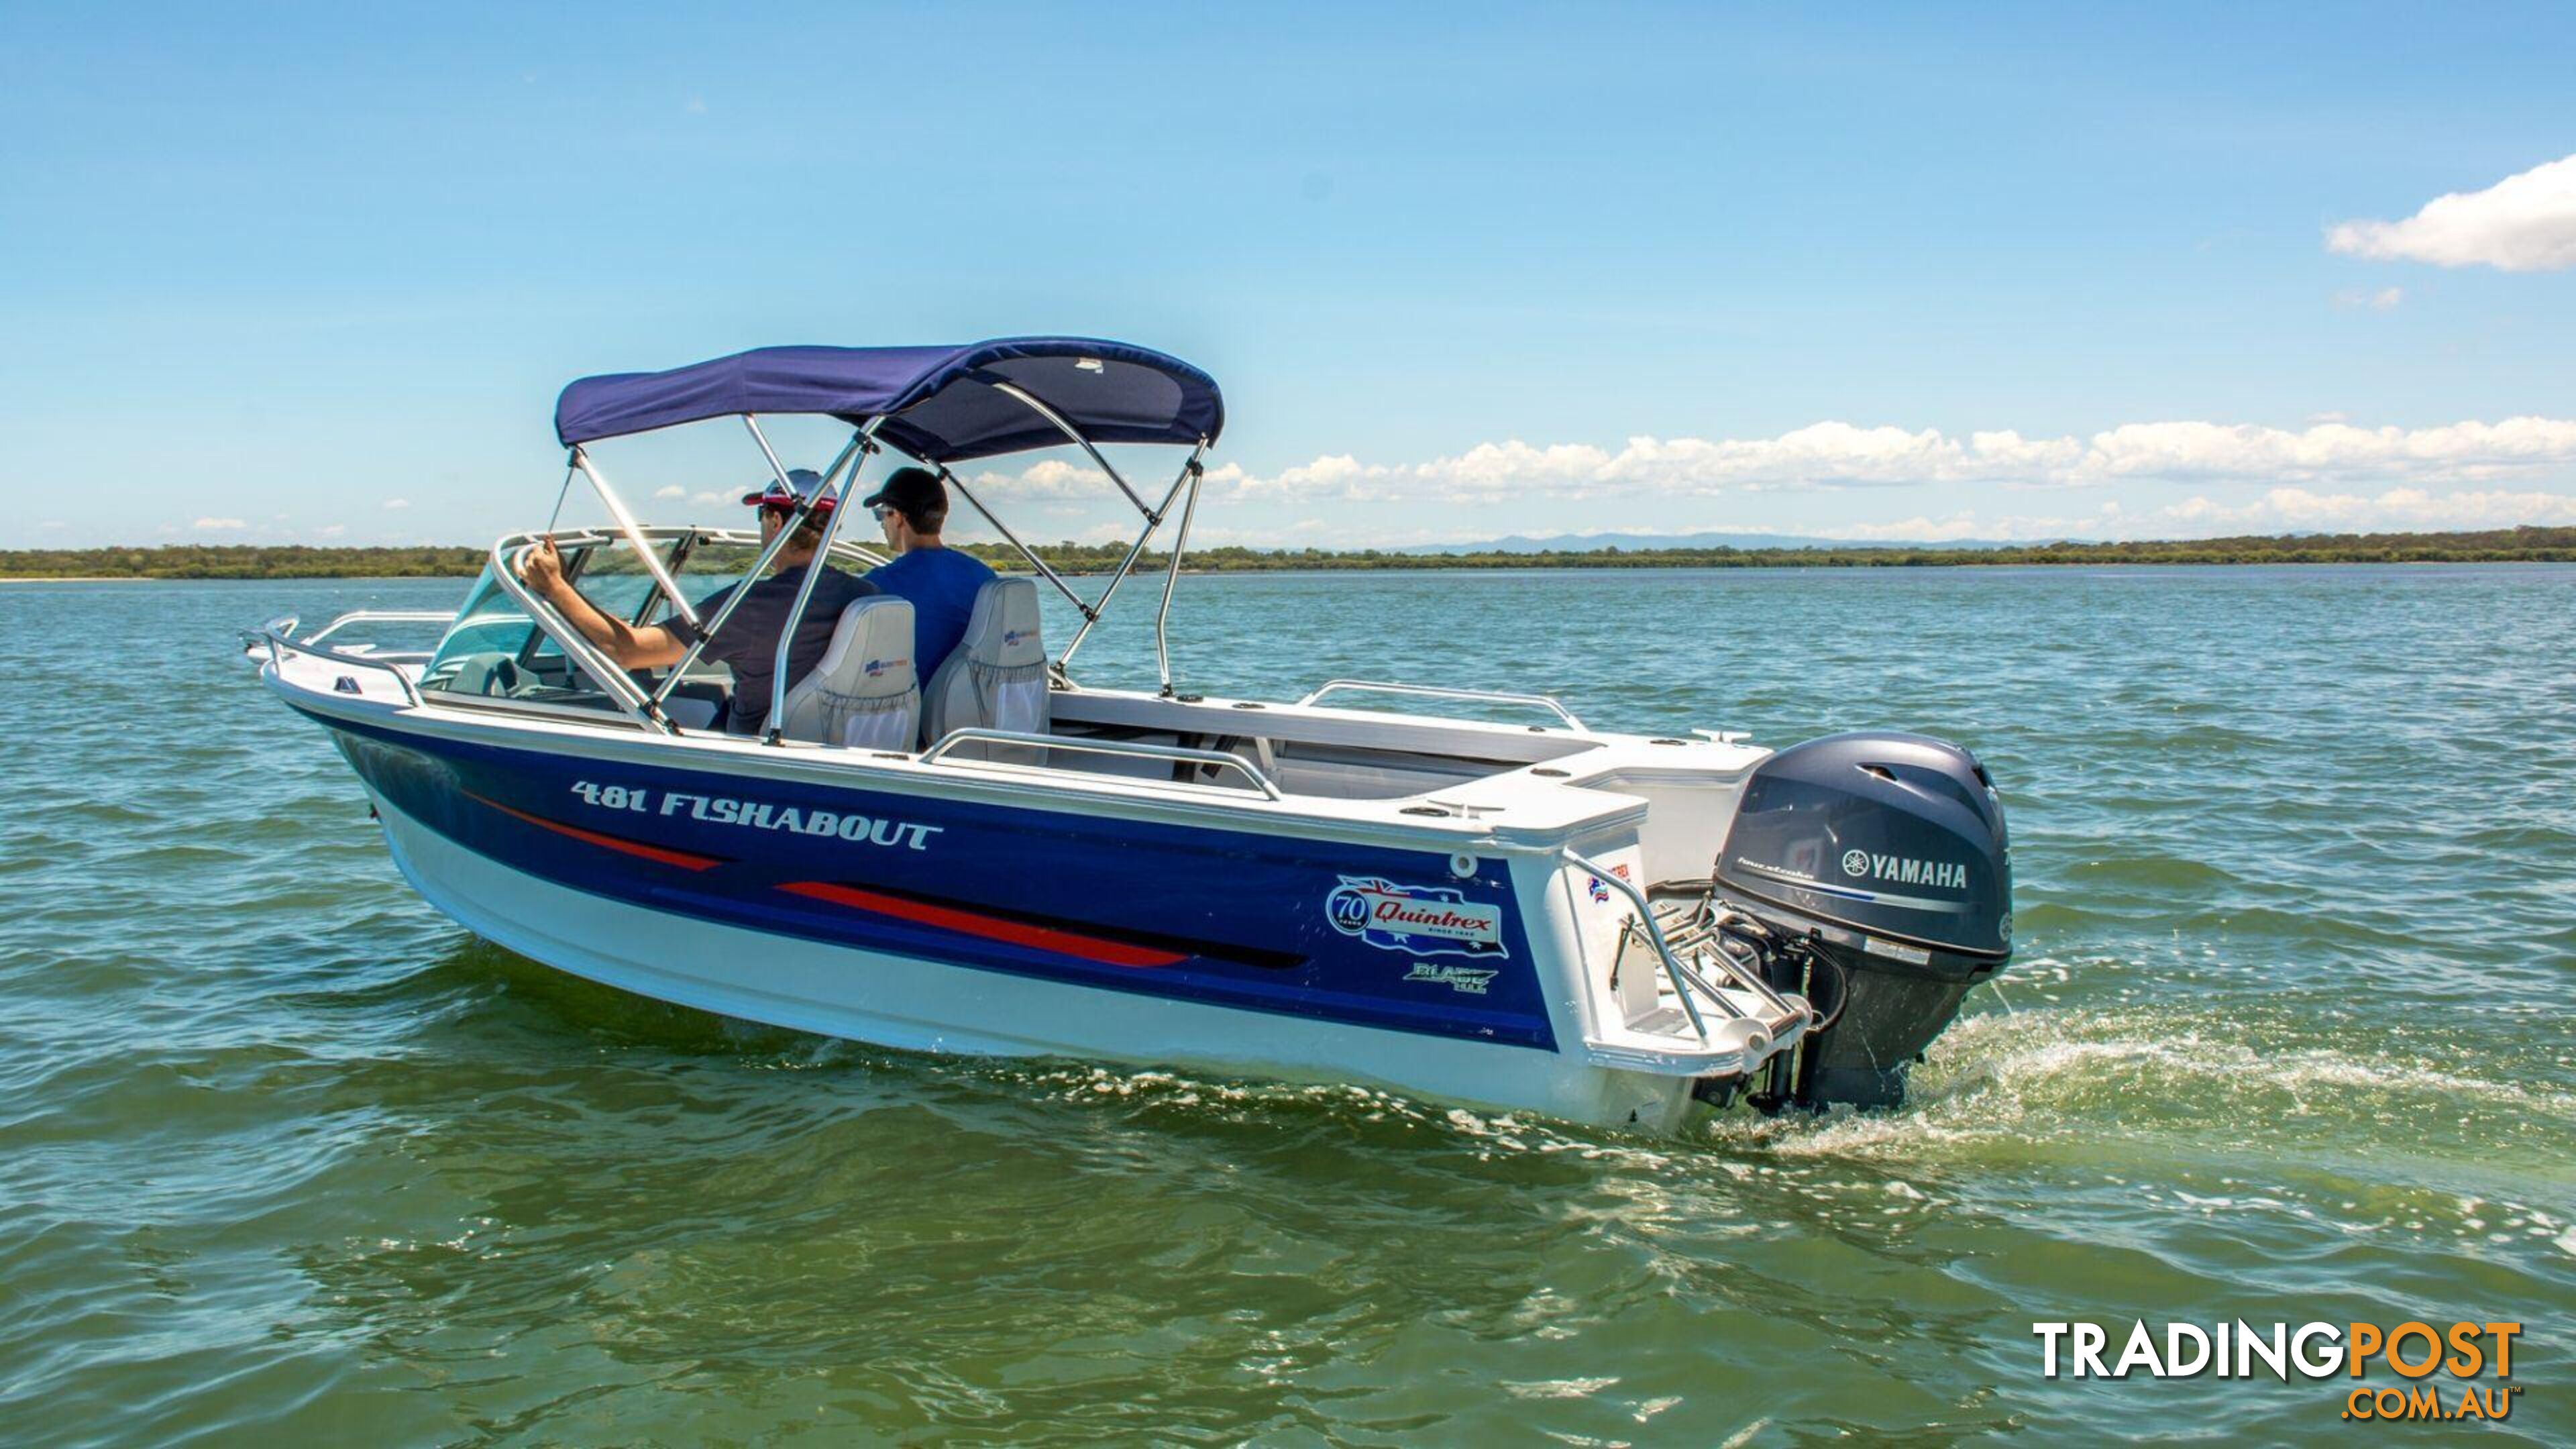 Quintrex 481 Fishabout + Yamaha F70hp 4-Stroke - Pack 1 for sale online prices